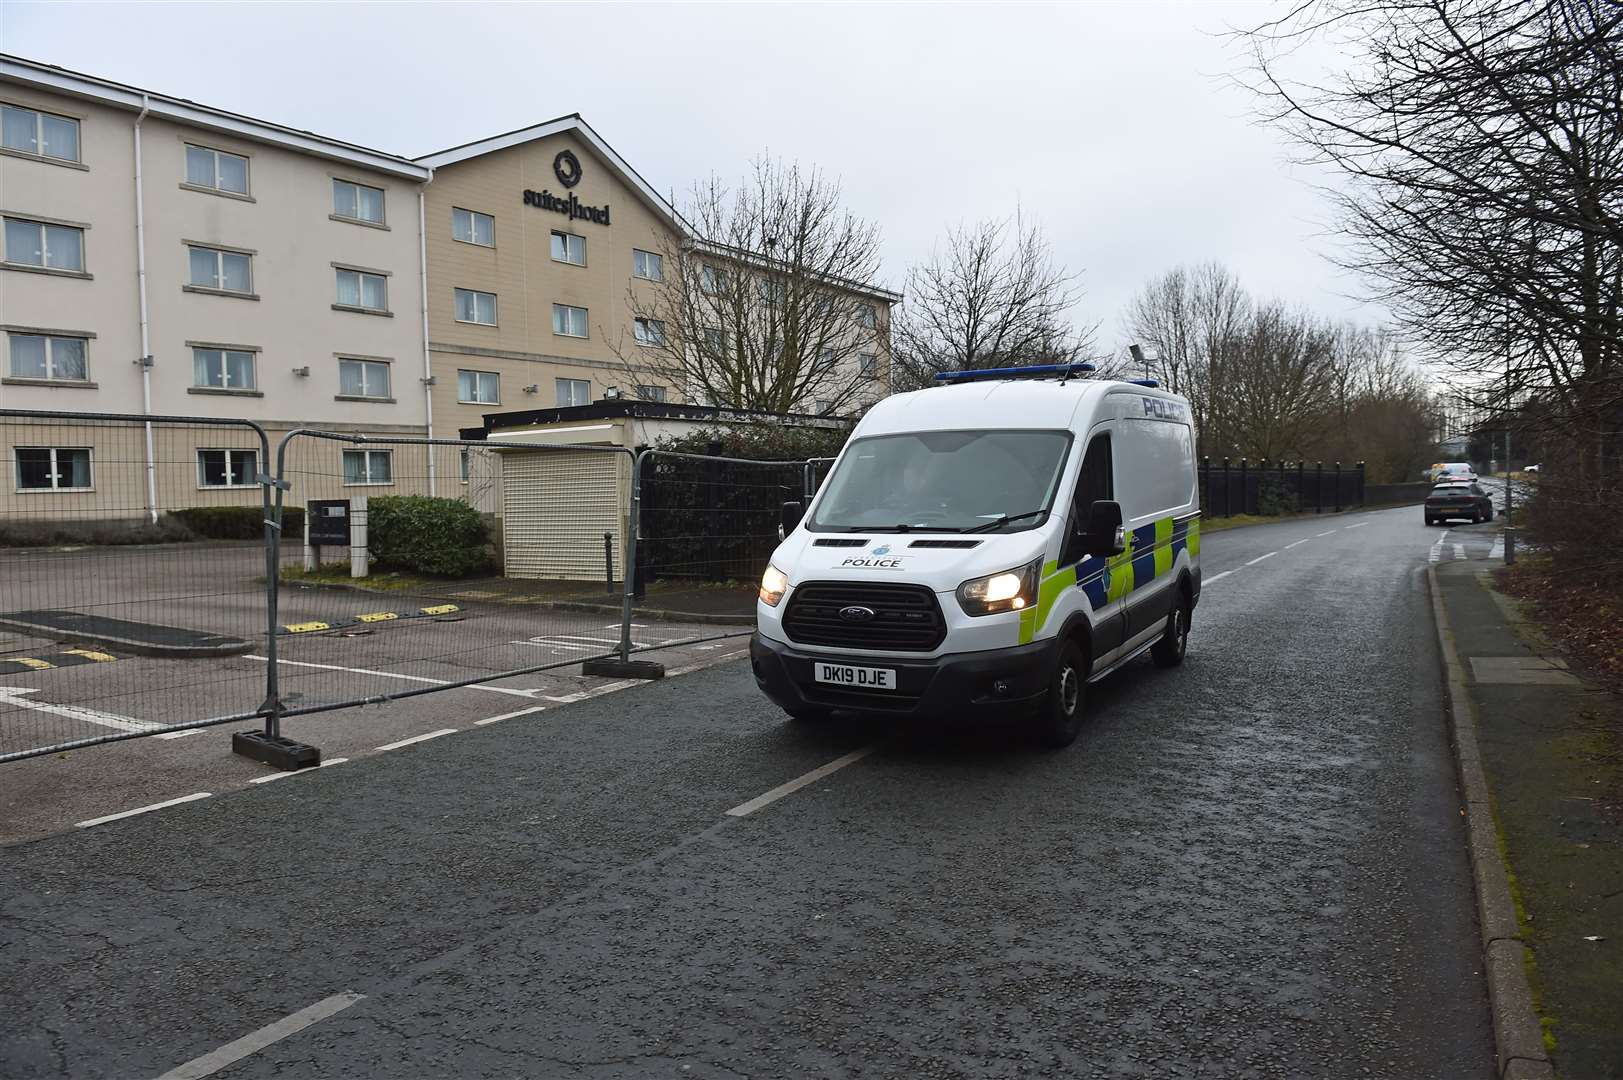 Police outside the Suites Hotel in Knowsley, Merseyside, after protesters demonstrated against asylum seekers being housed there (Peter Powell/PA)